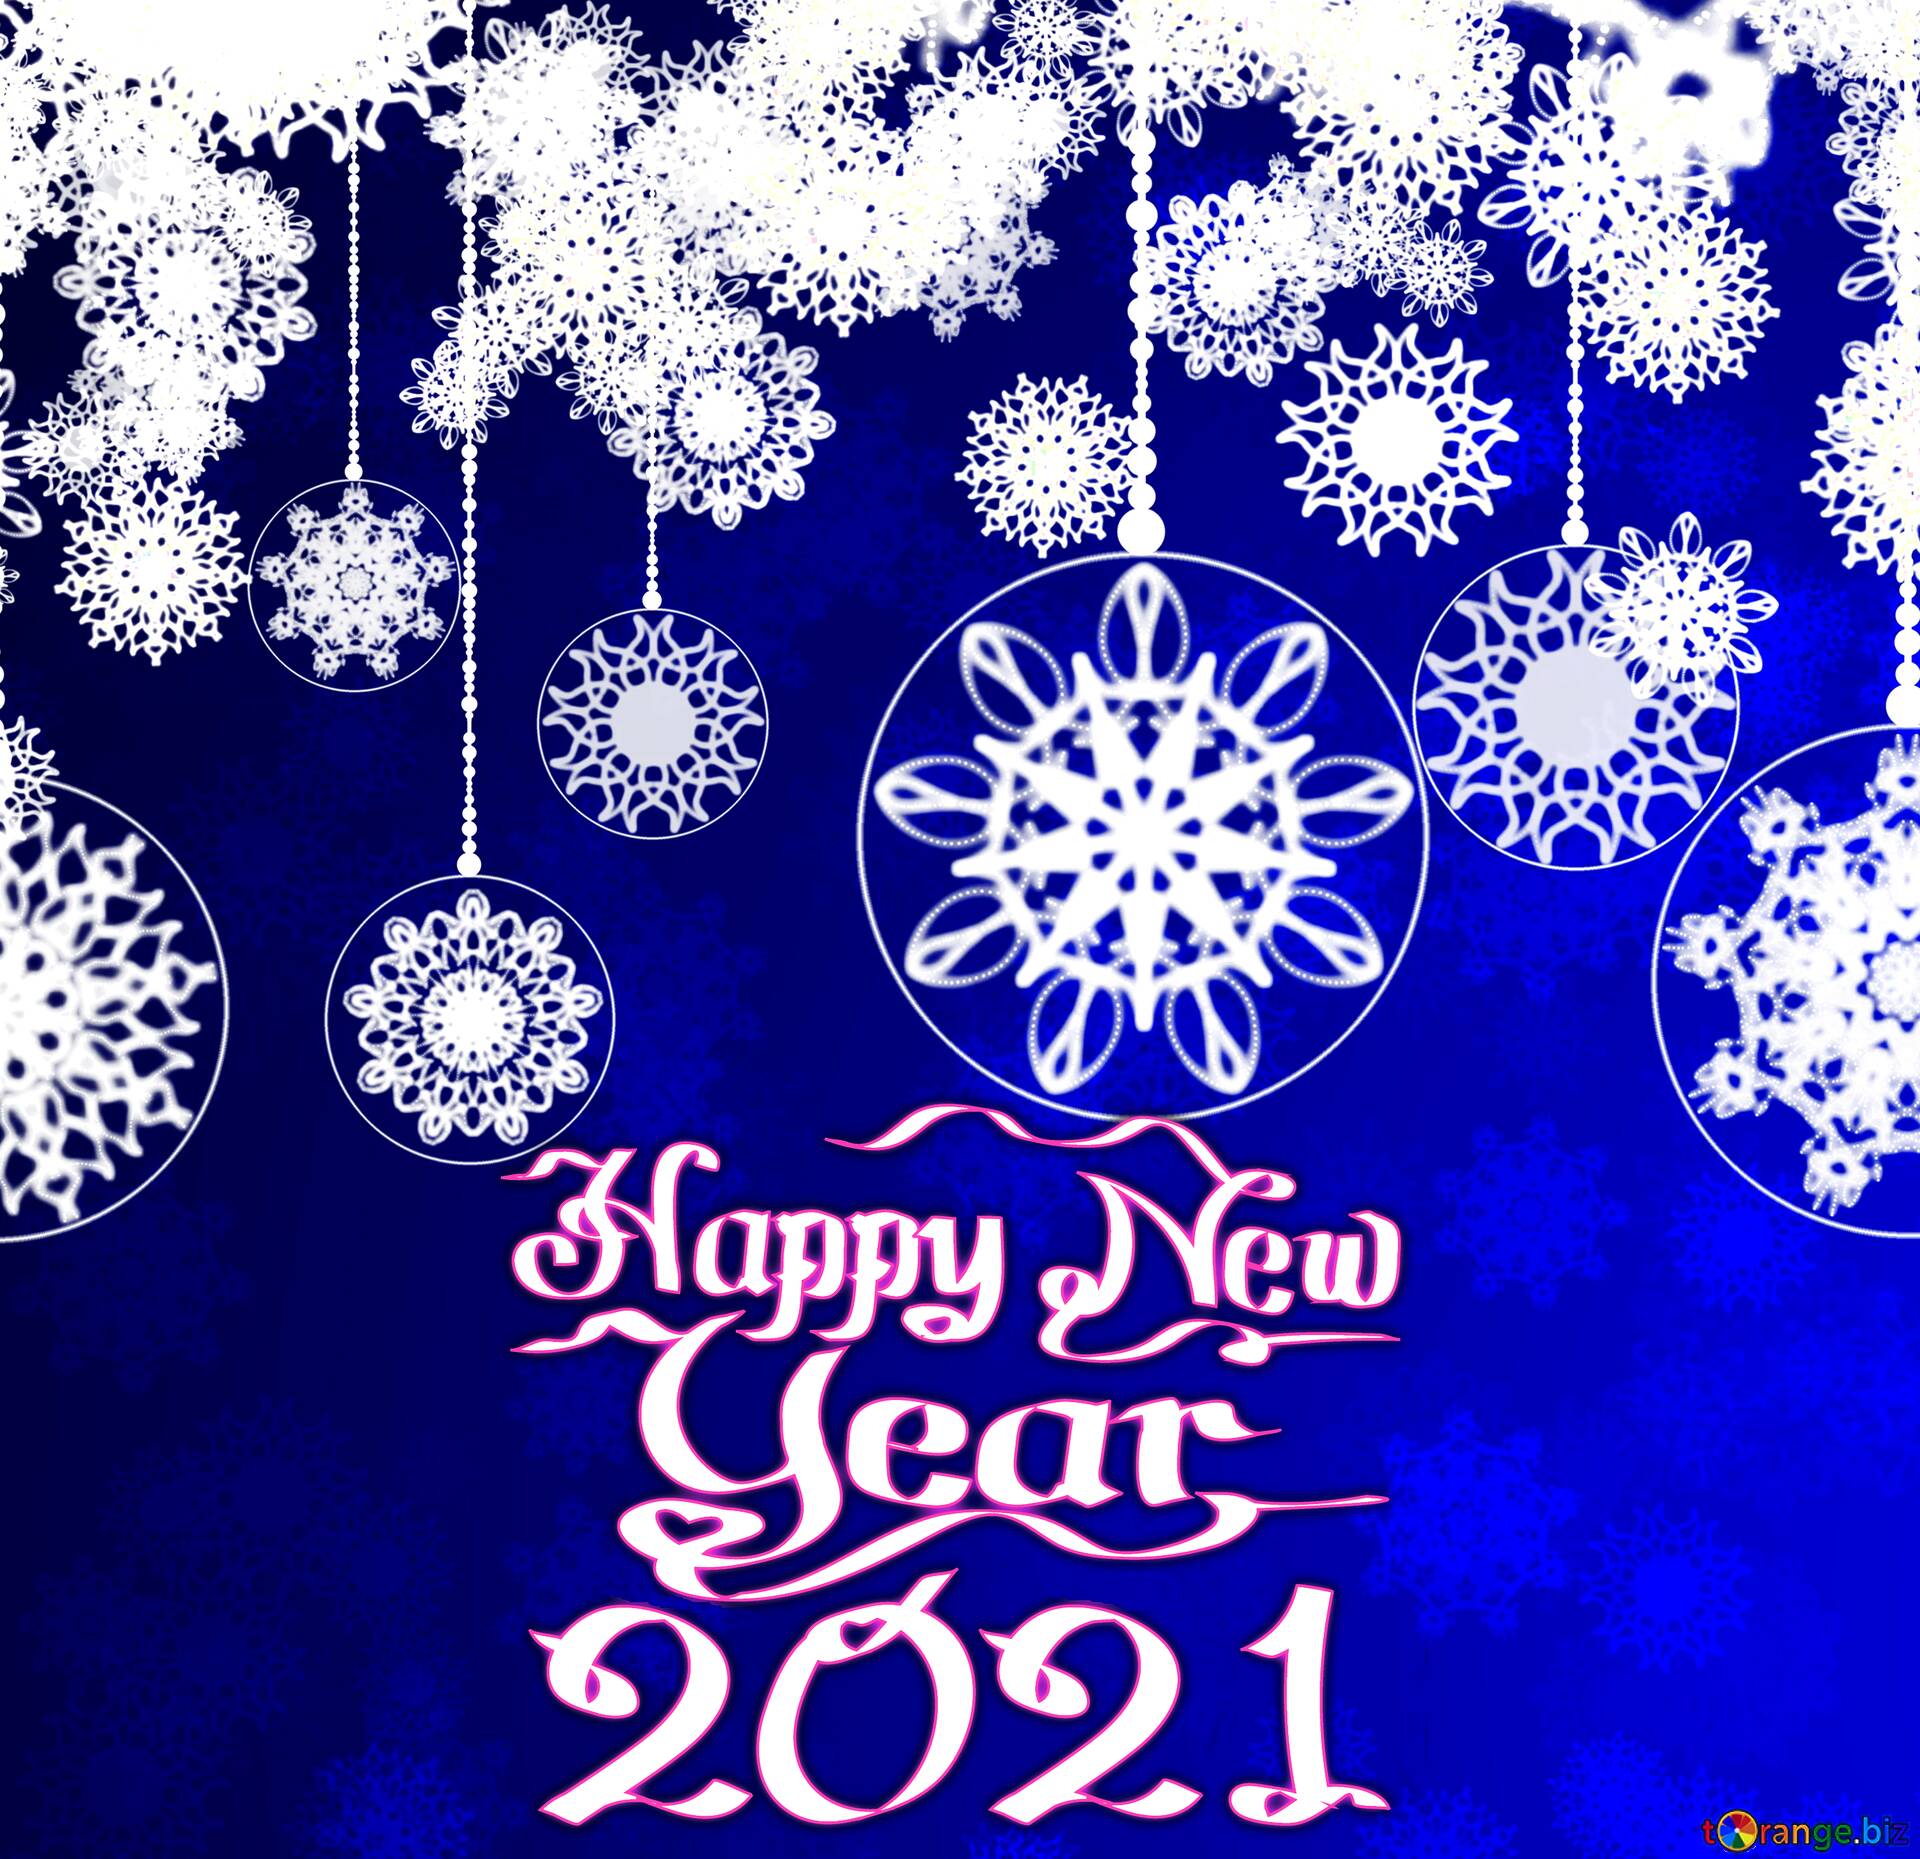 Download Free Picture Clipart Christmas Happy New Year 2021 On CC BY License Free Image Stock TOrange.biz Fx №207347